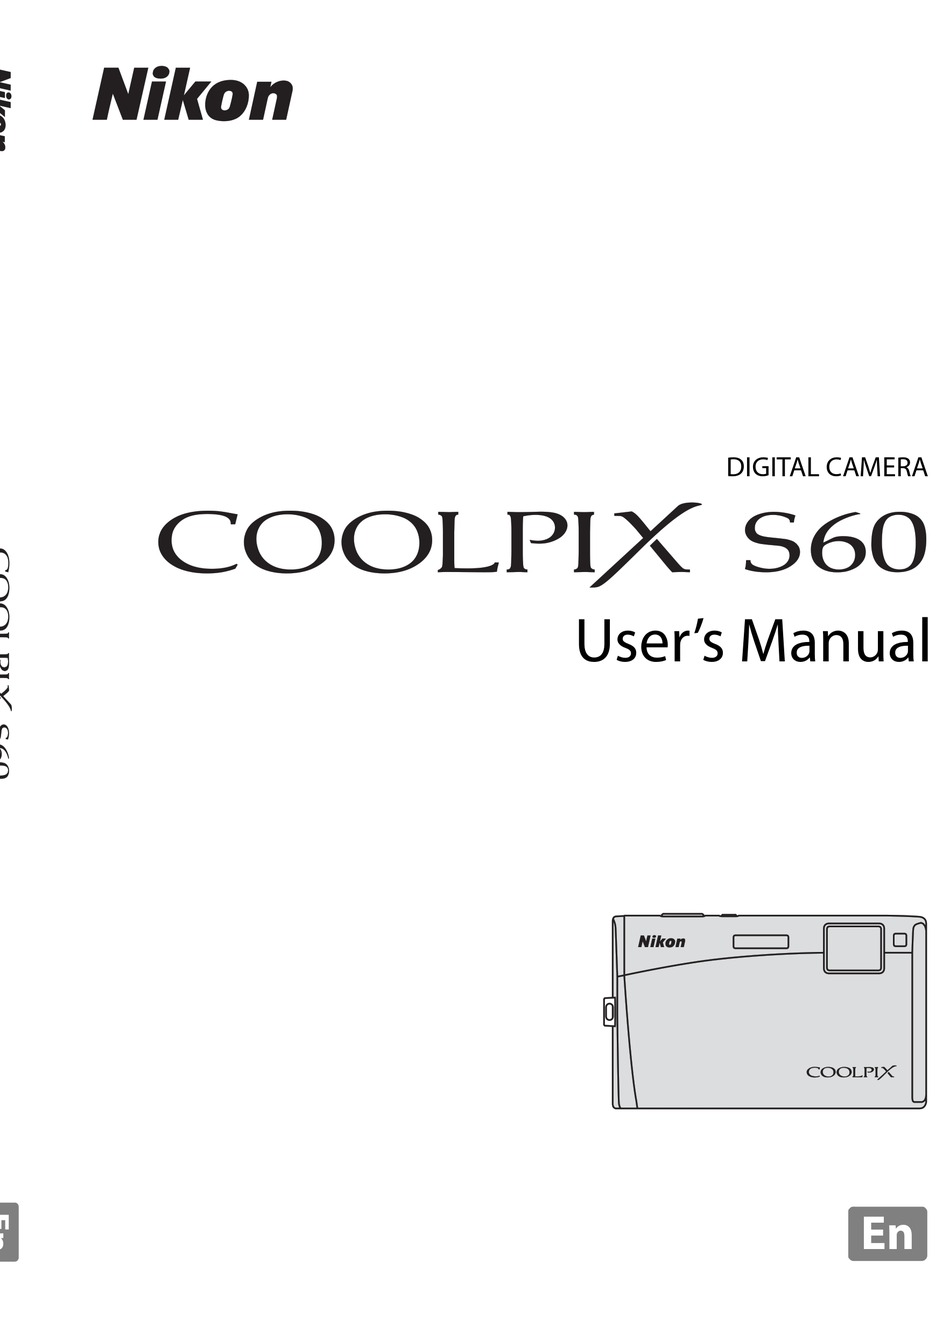 A5 NIKON COOLPIX S5100 FULLY PRINTED INSTRUCTION MANUAL USER GUIDE 180 PAGES 